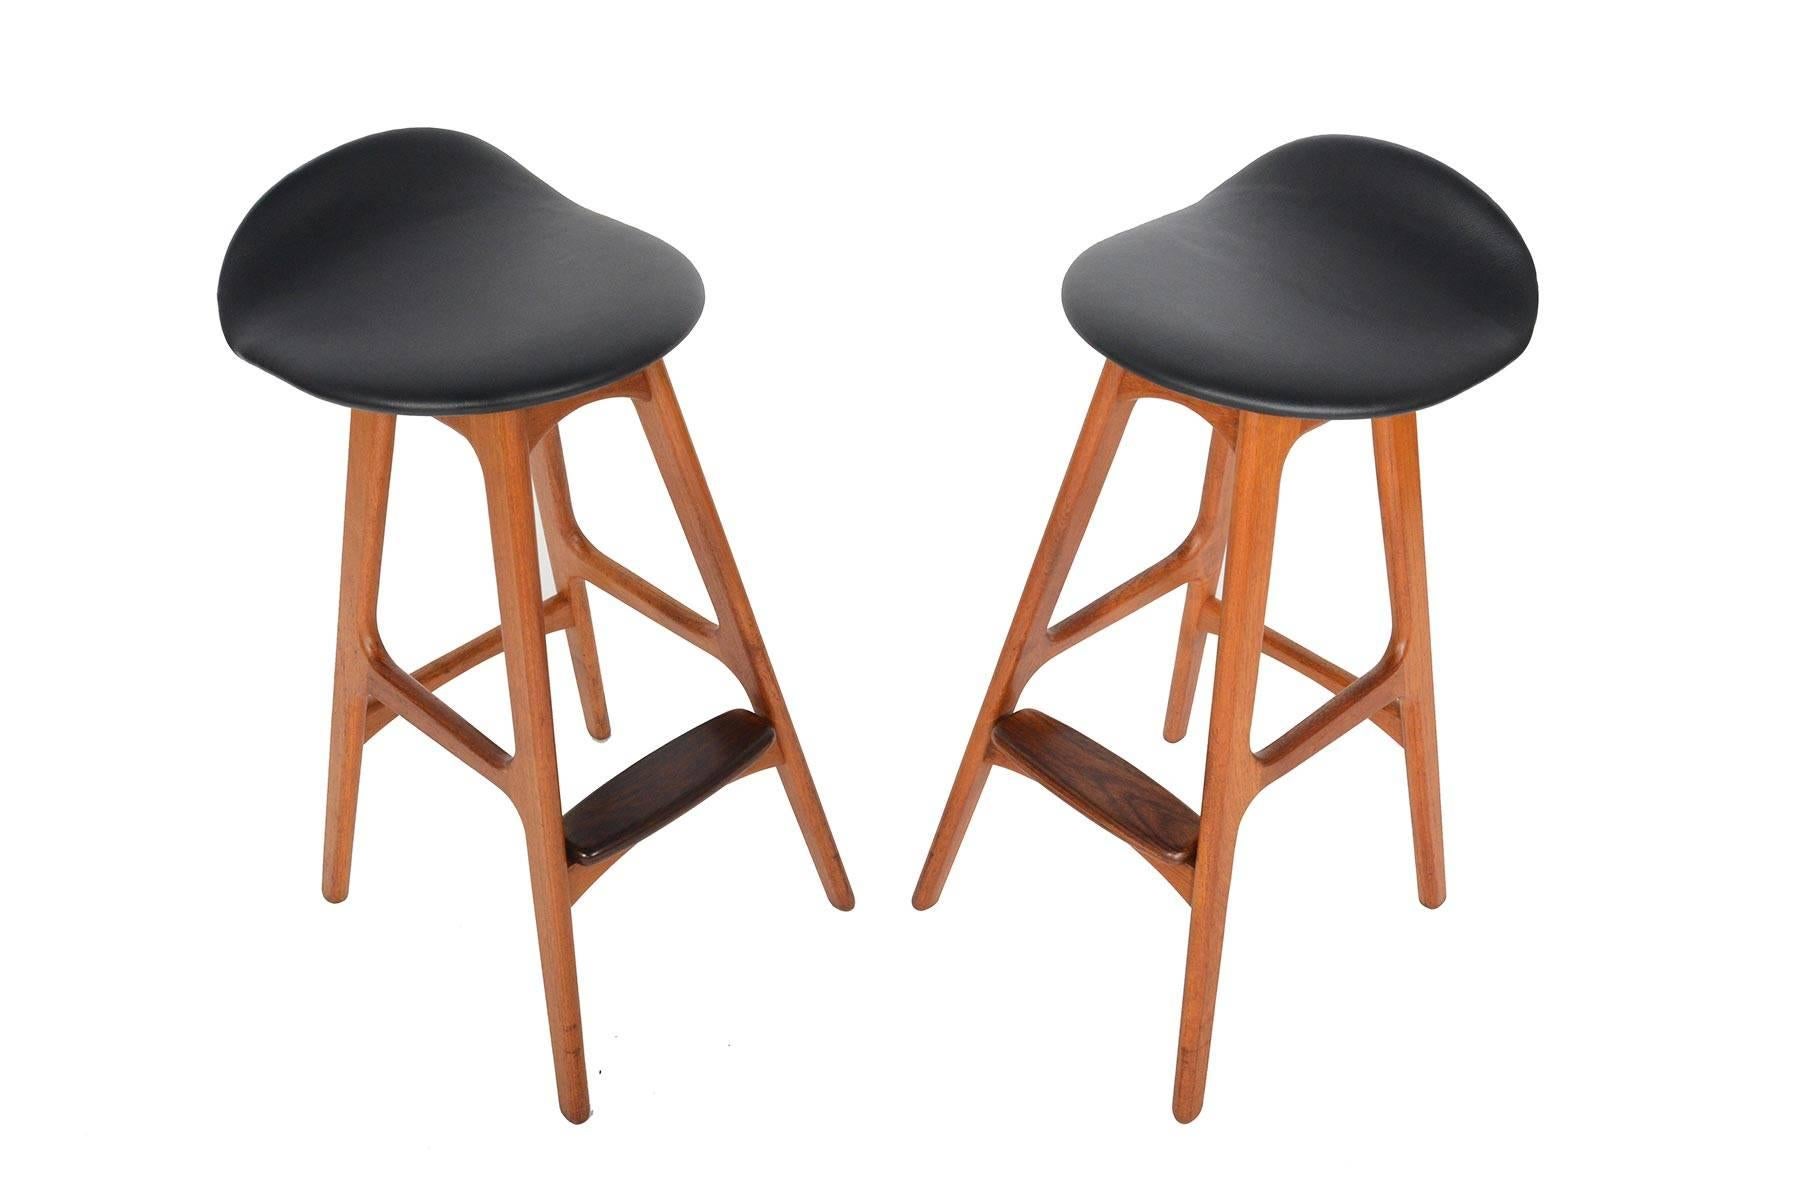 This pair of Danish modern teak bar stools was designed by Erik Buck for Oddense Maskinsnedkeri in 1961. Sitting atop slender tapered legs, this set is sophisticated and sturdy. Exceptional joinery throughout compliments the molded seat designed